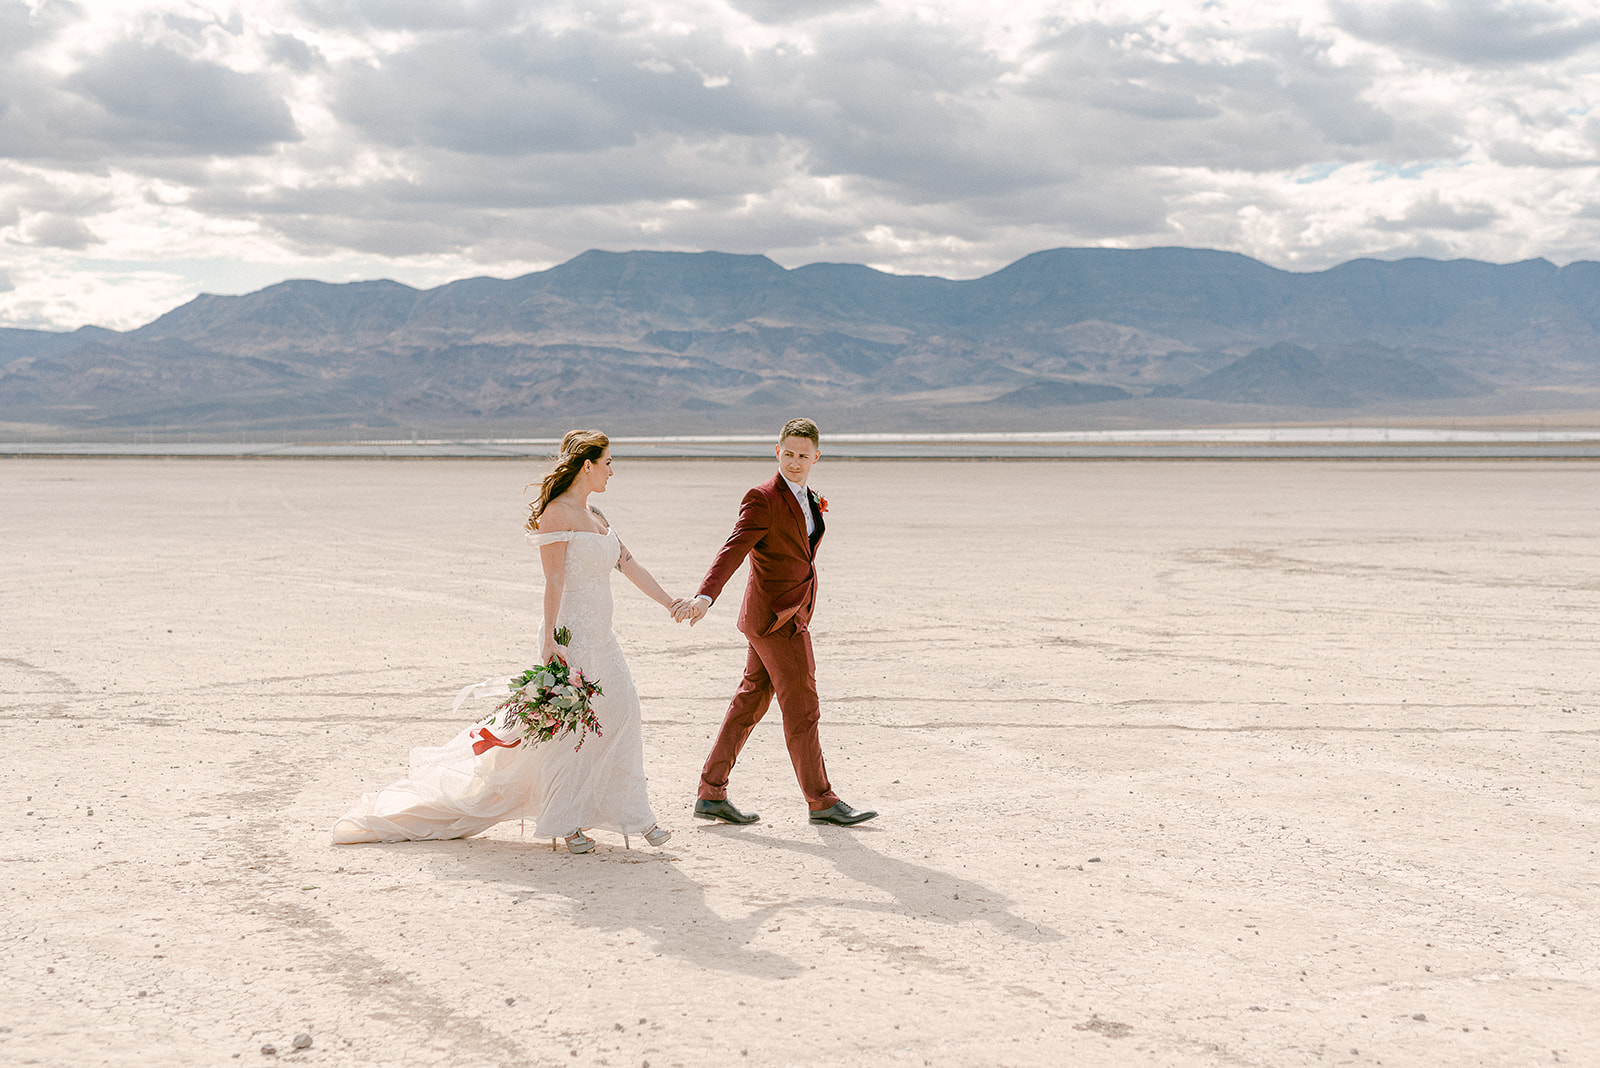 Groom looks back at the bride as they hold hands and walk along Dry Lake Bed, photographed by Emily Reno